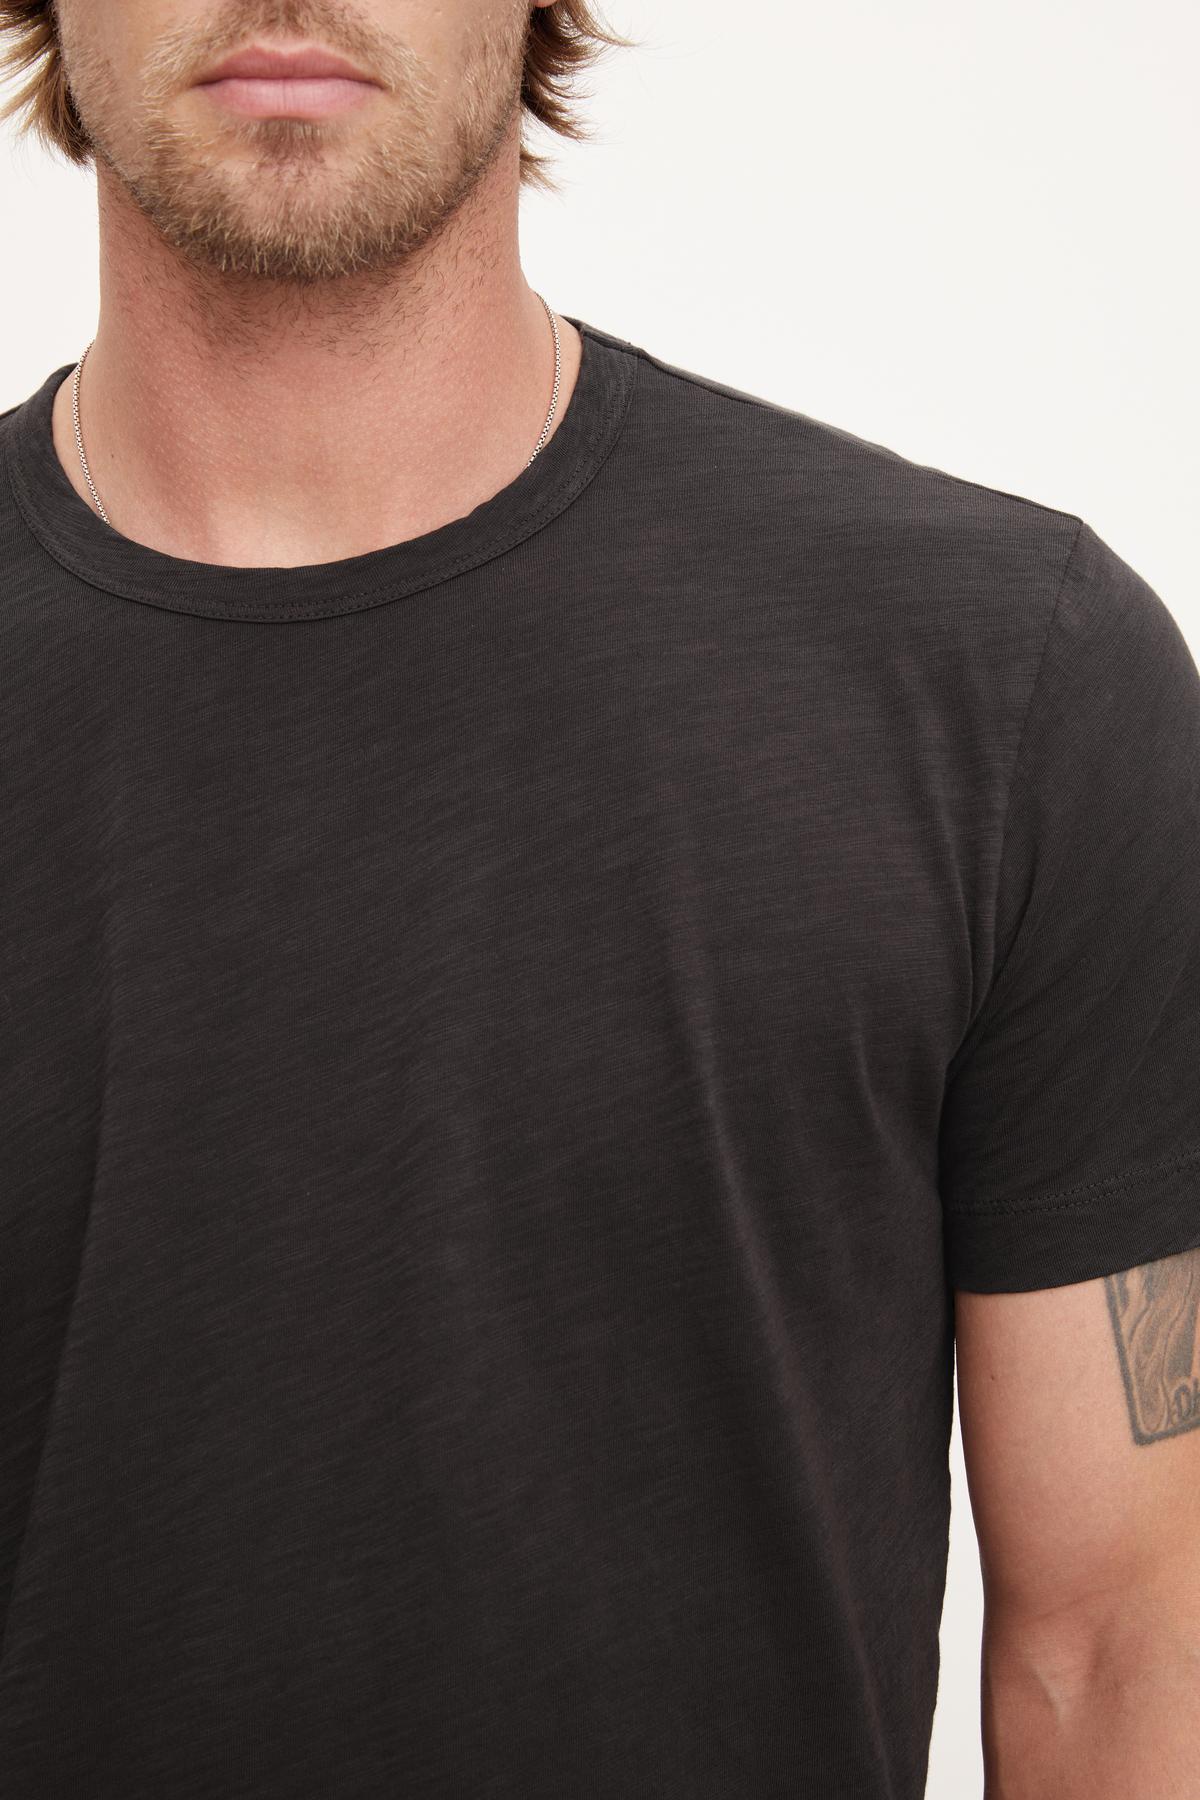   A man wearing a black crew neck Velvet by Graham & Spencer AMARO TEE with a visible tattoo on his left arm. 